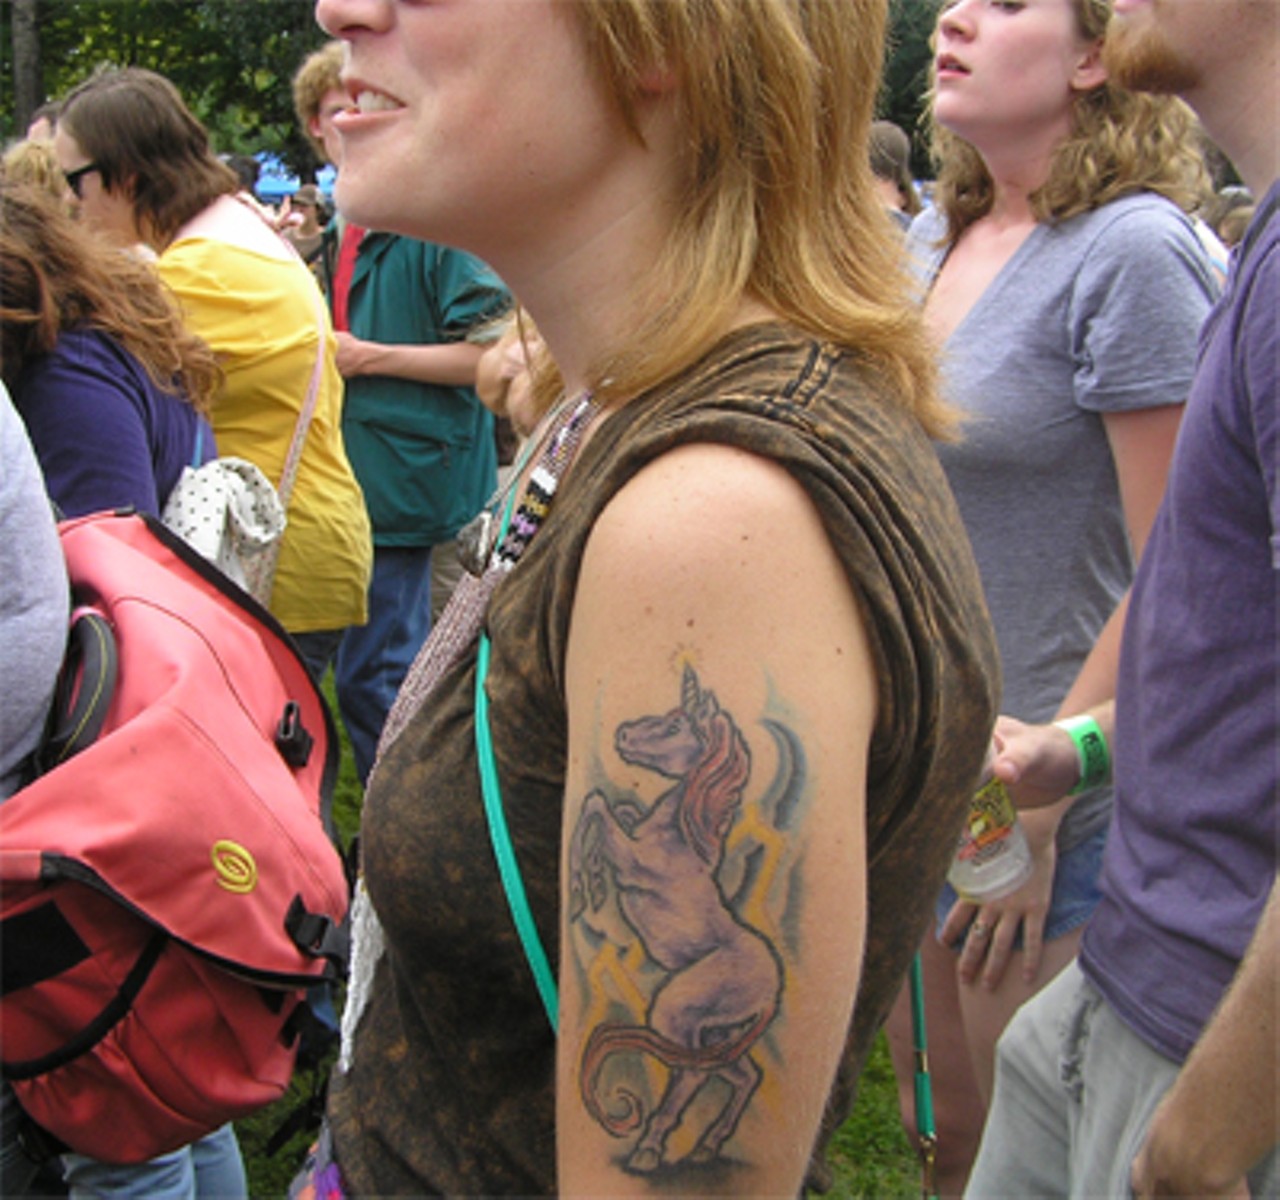 Not content to show off lowest-common-denominator tattoos like Chinese symbols and/or lower-back tramp stamps, Pitchforkers showed off tats of a more indie-rock variety. Like unicorn tattoos.
Click here for set reviews and  more photos from Pitchfork '08.